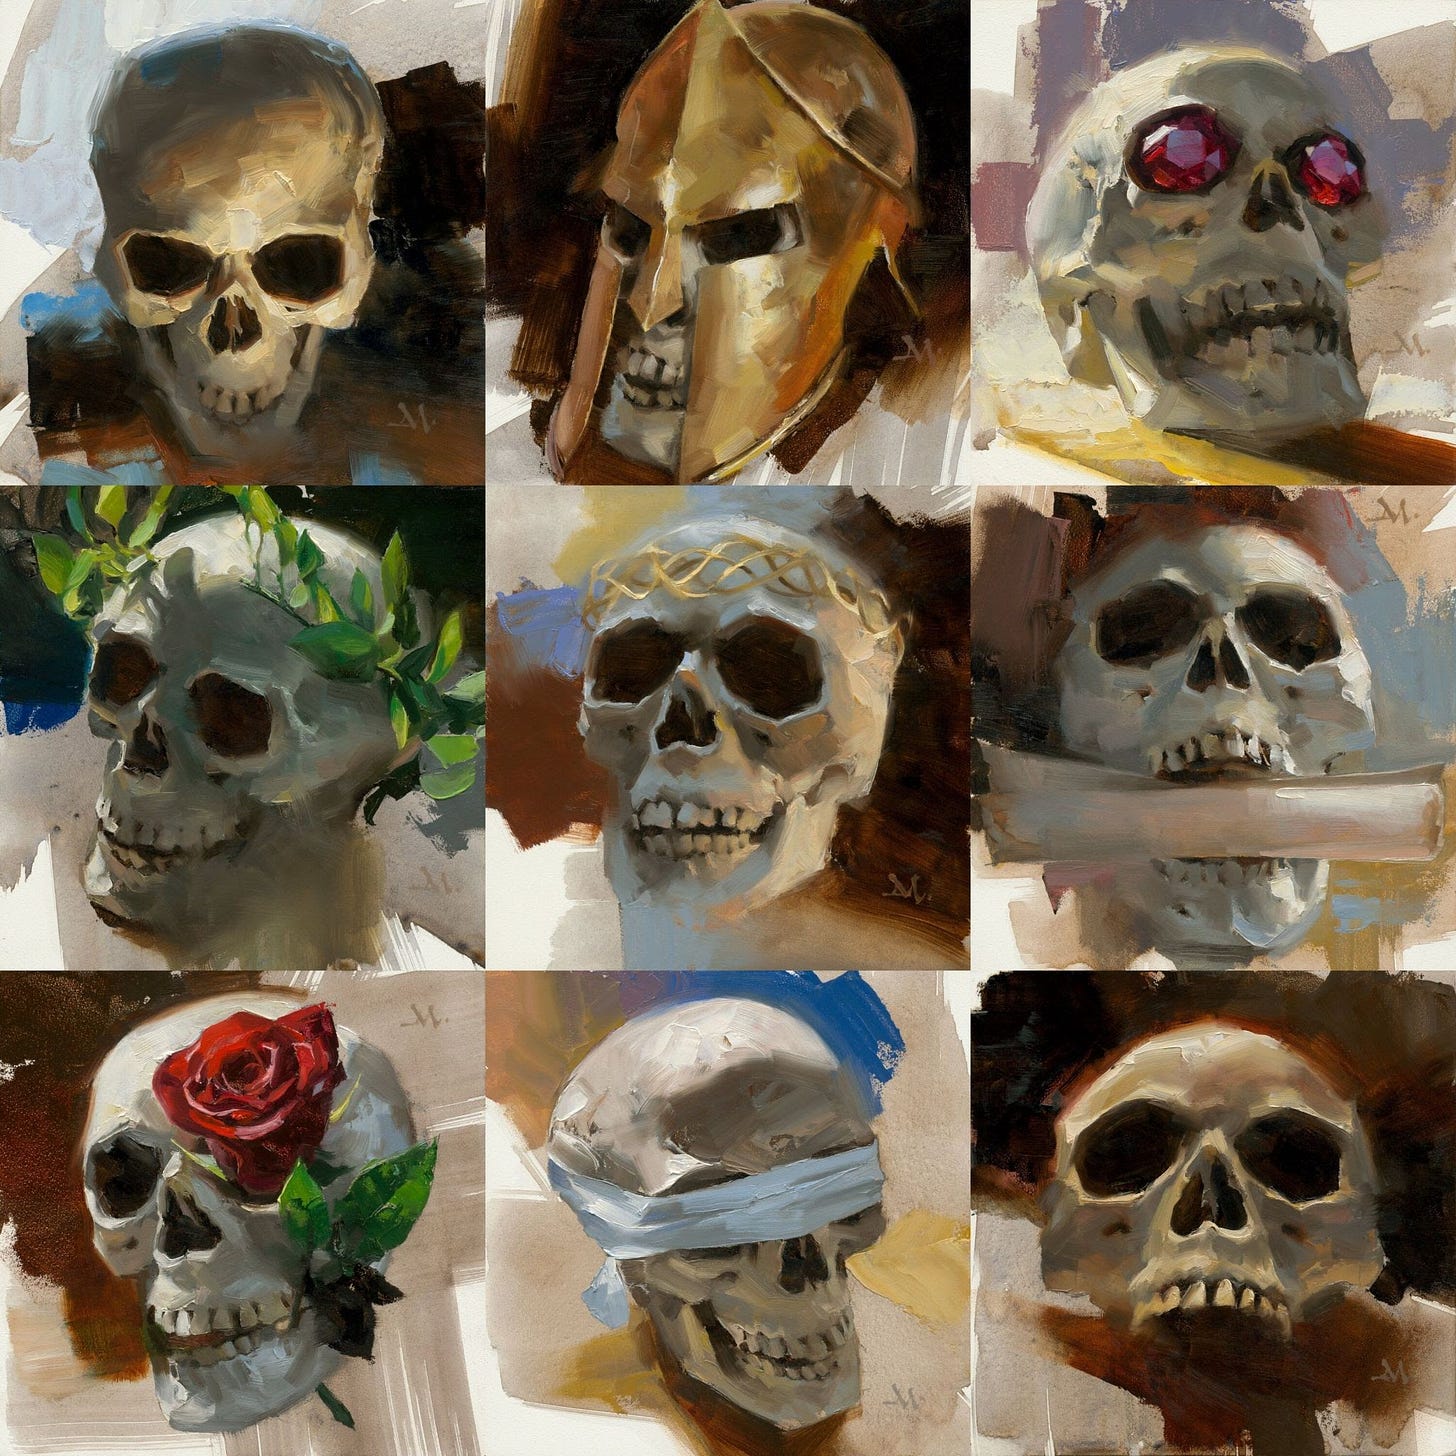 Left-to-right from top left, skulls with the following features: plain; in a Greek-style helmet; with jewels for eyes; wearing a laurel wreath; wearing a gold circlet; holding a scroll in its jaw; with a rose in one eye; with a white blindfold; missing its jaw.